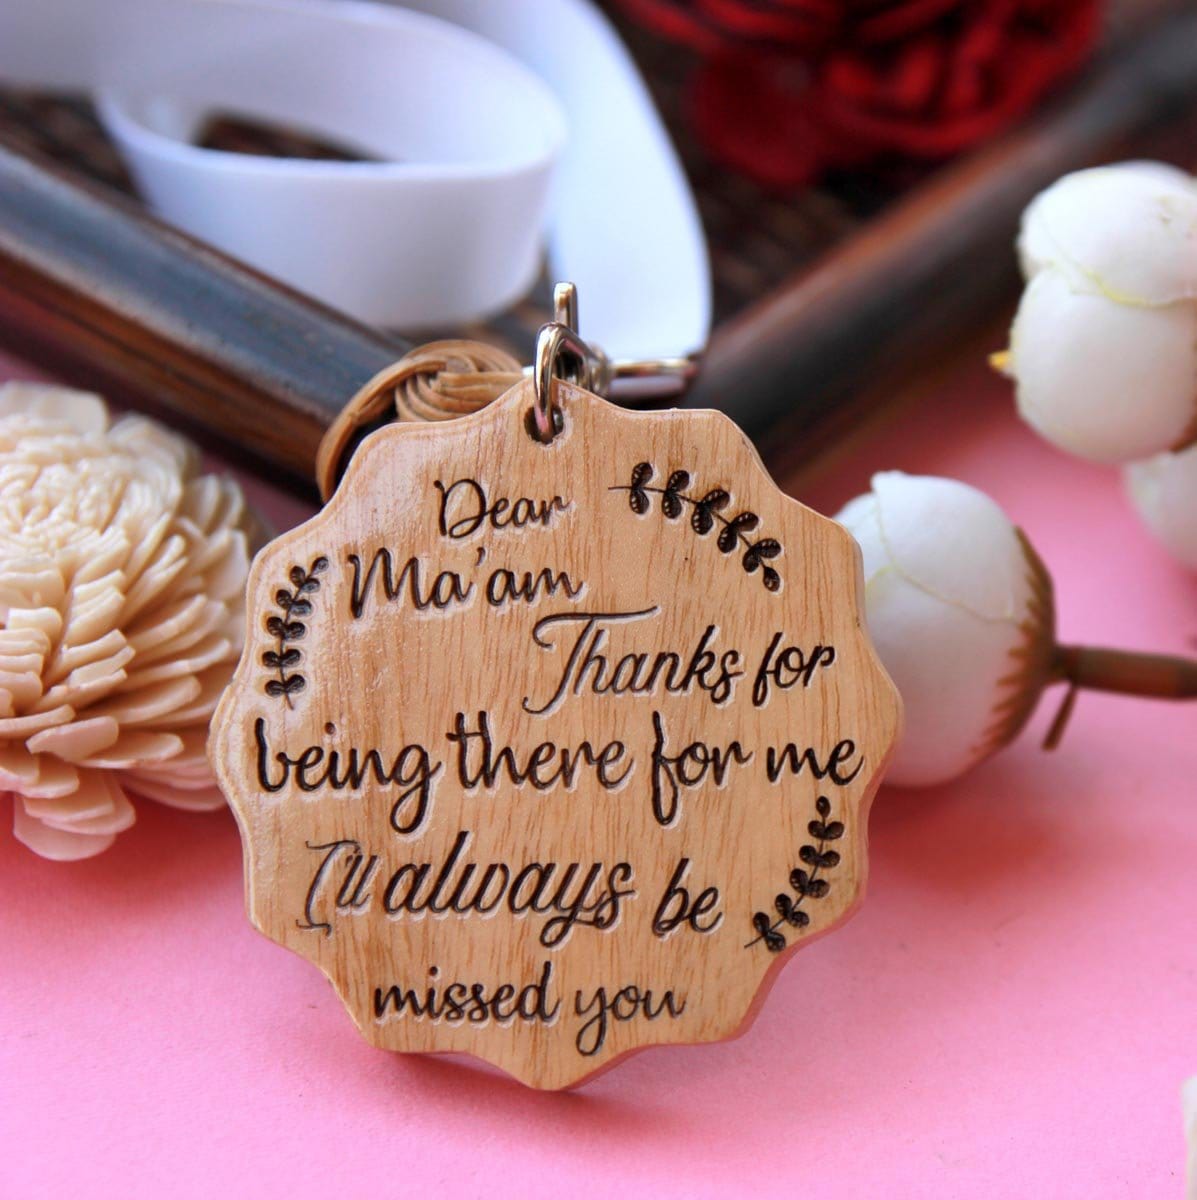 40 of the Most Meaningful Going Away Gifts